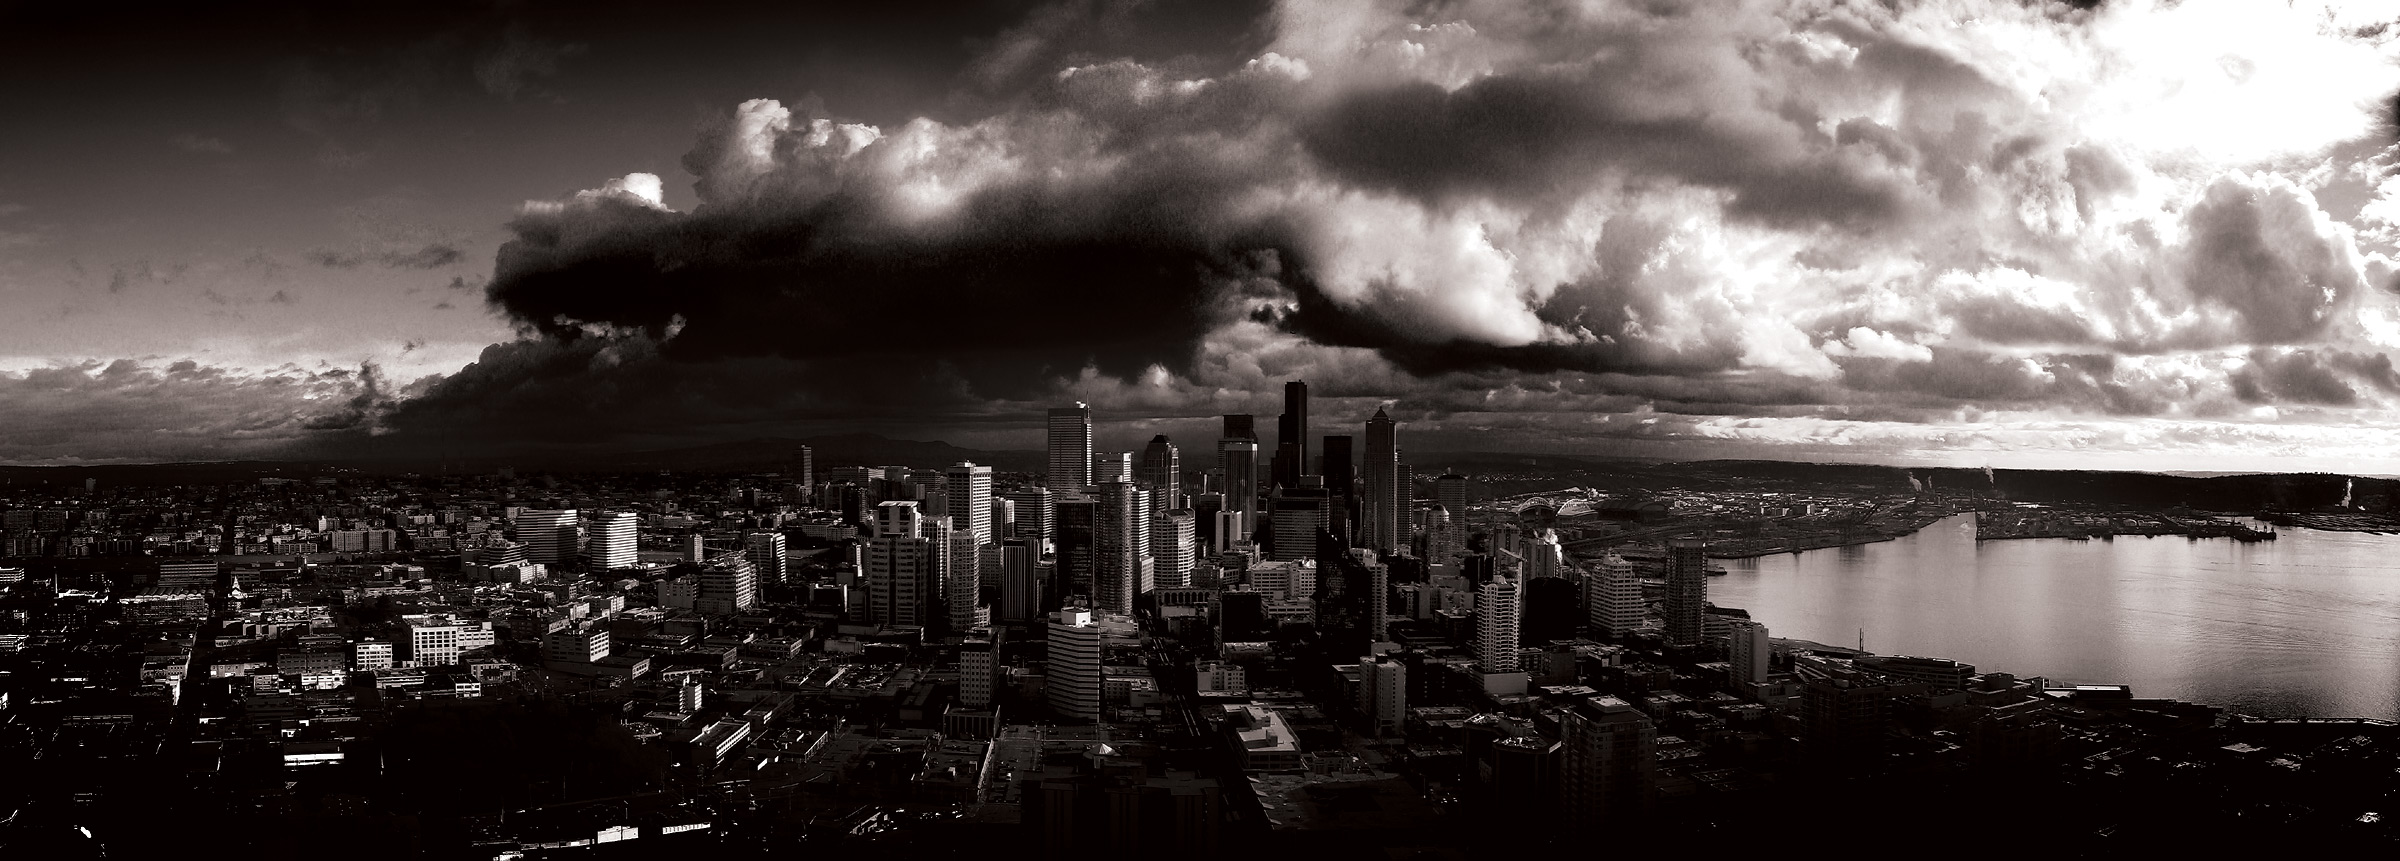 stormy seattle grayscale dual monitor hd quality HD Wallpaper 2400x861